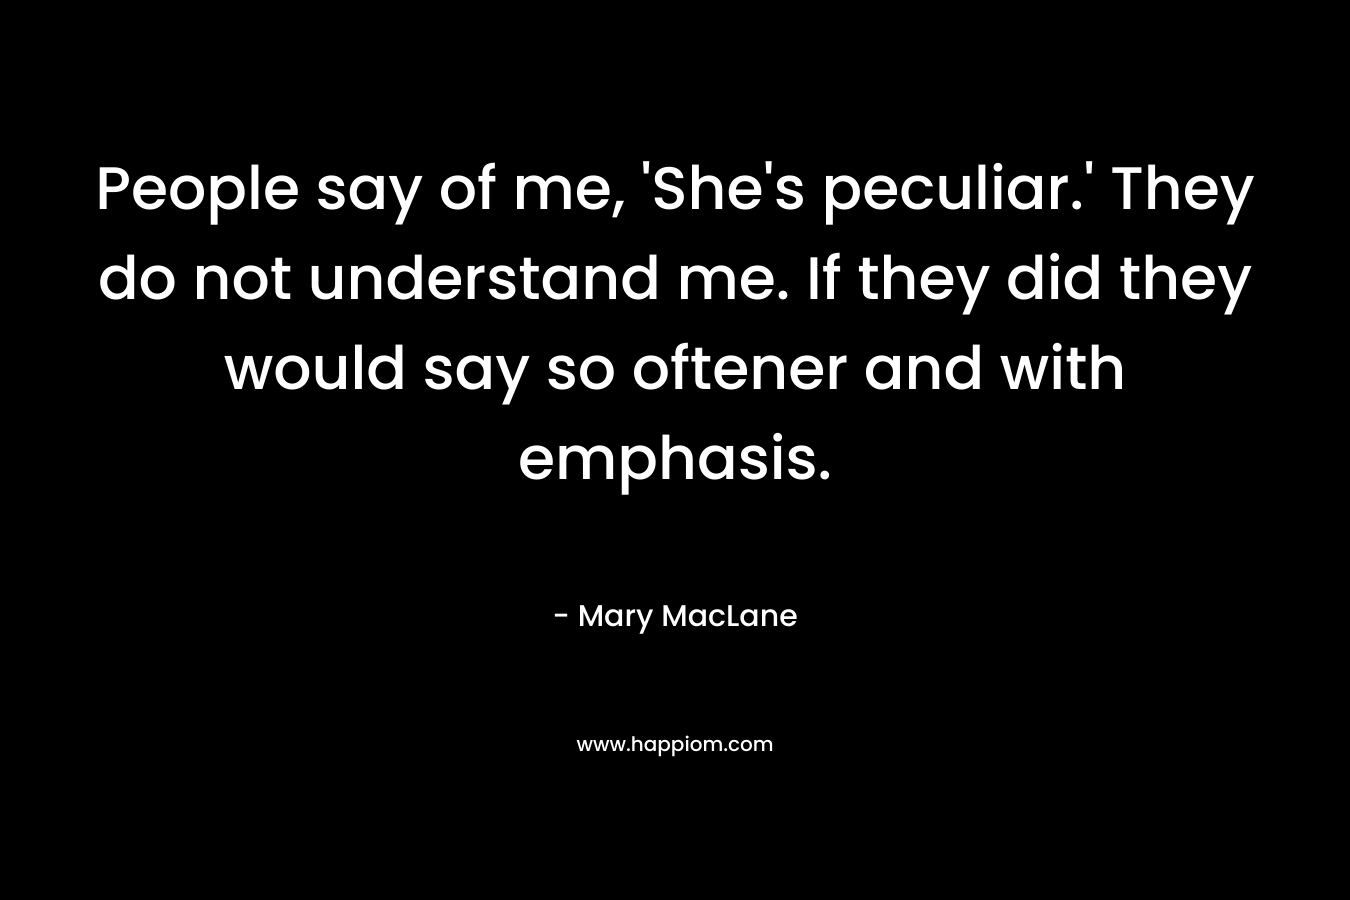 People say of me, 'She's peculiar.' They do not understand me. If they did they would say so oftener and with emphasis.